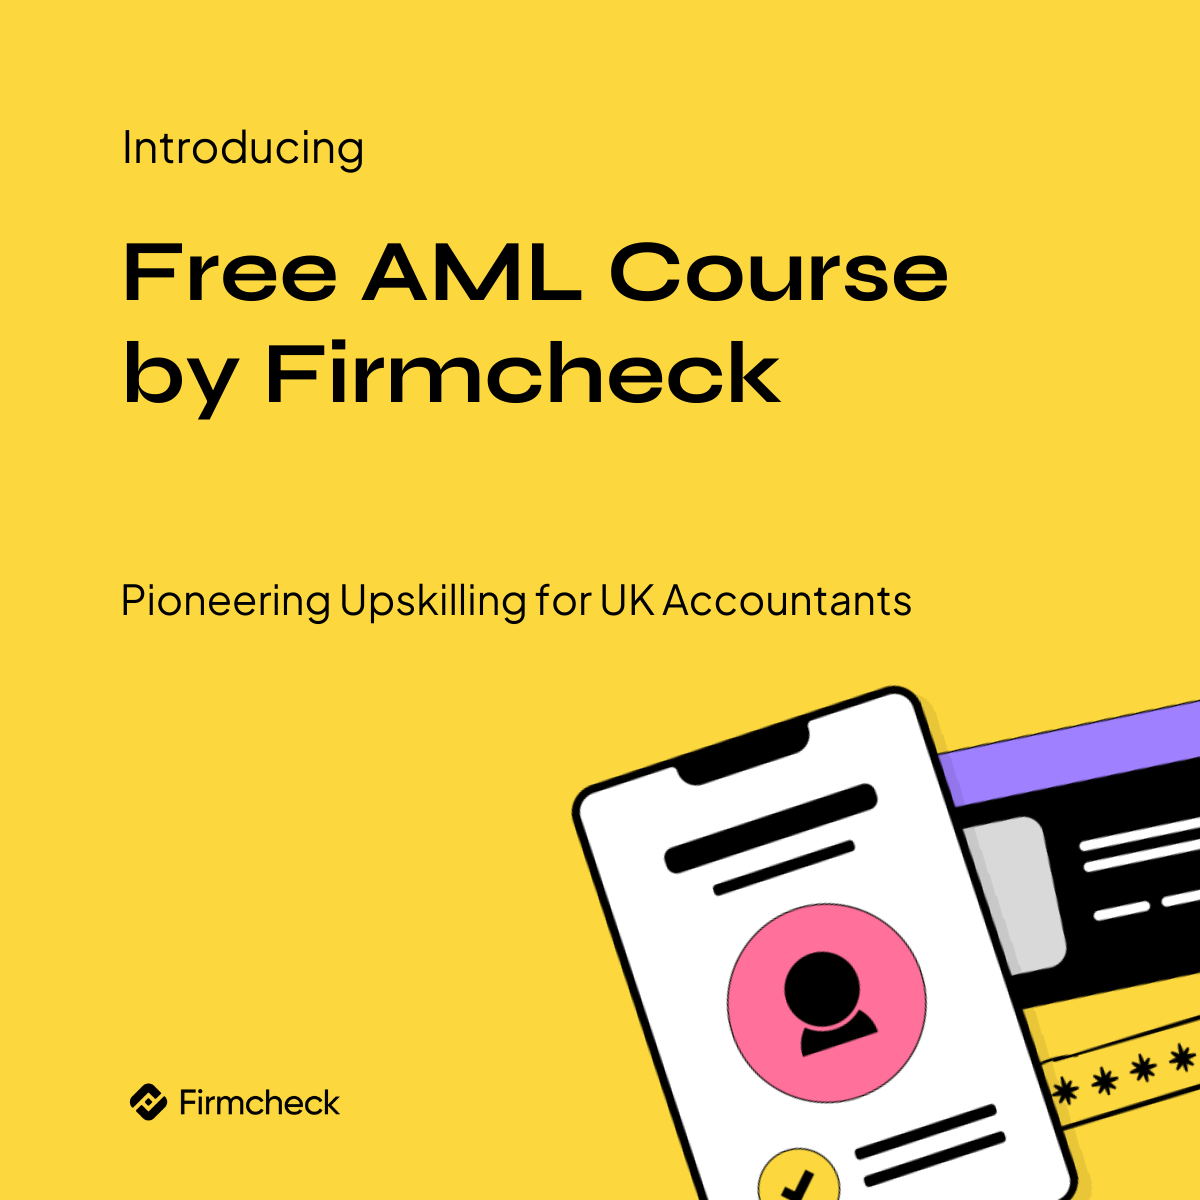 Firmcheck Launches Free AML Course: A Pioneering Initiative to Upskill UK Accountants image